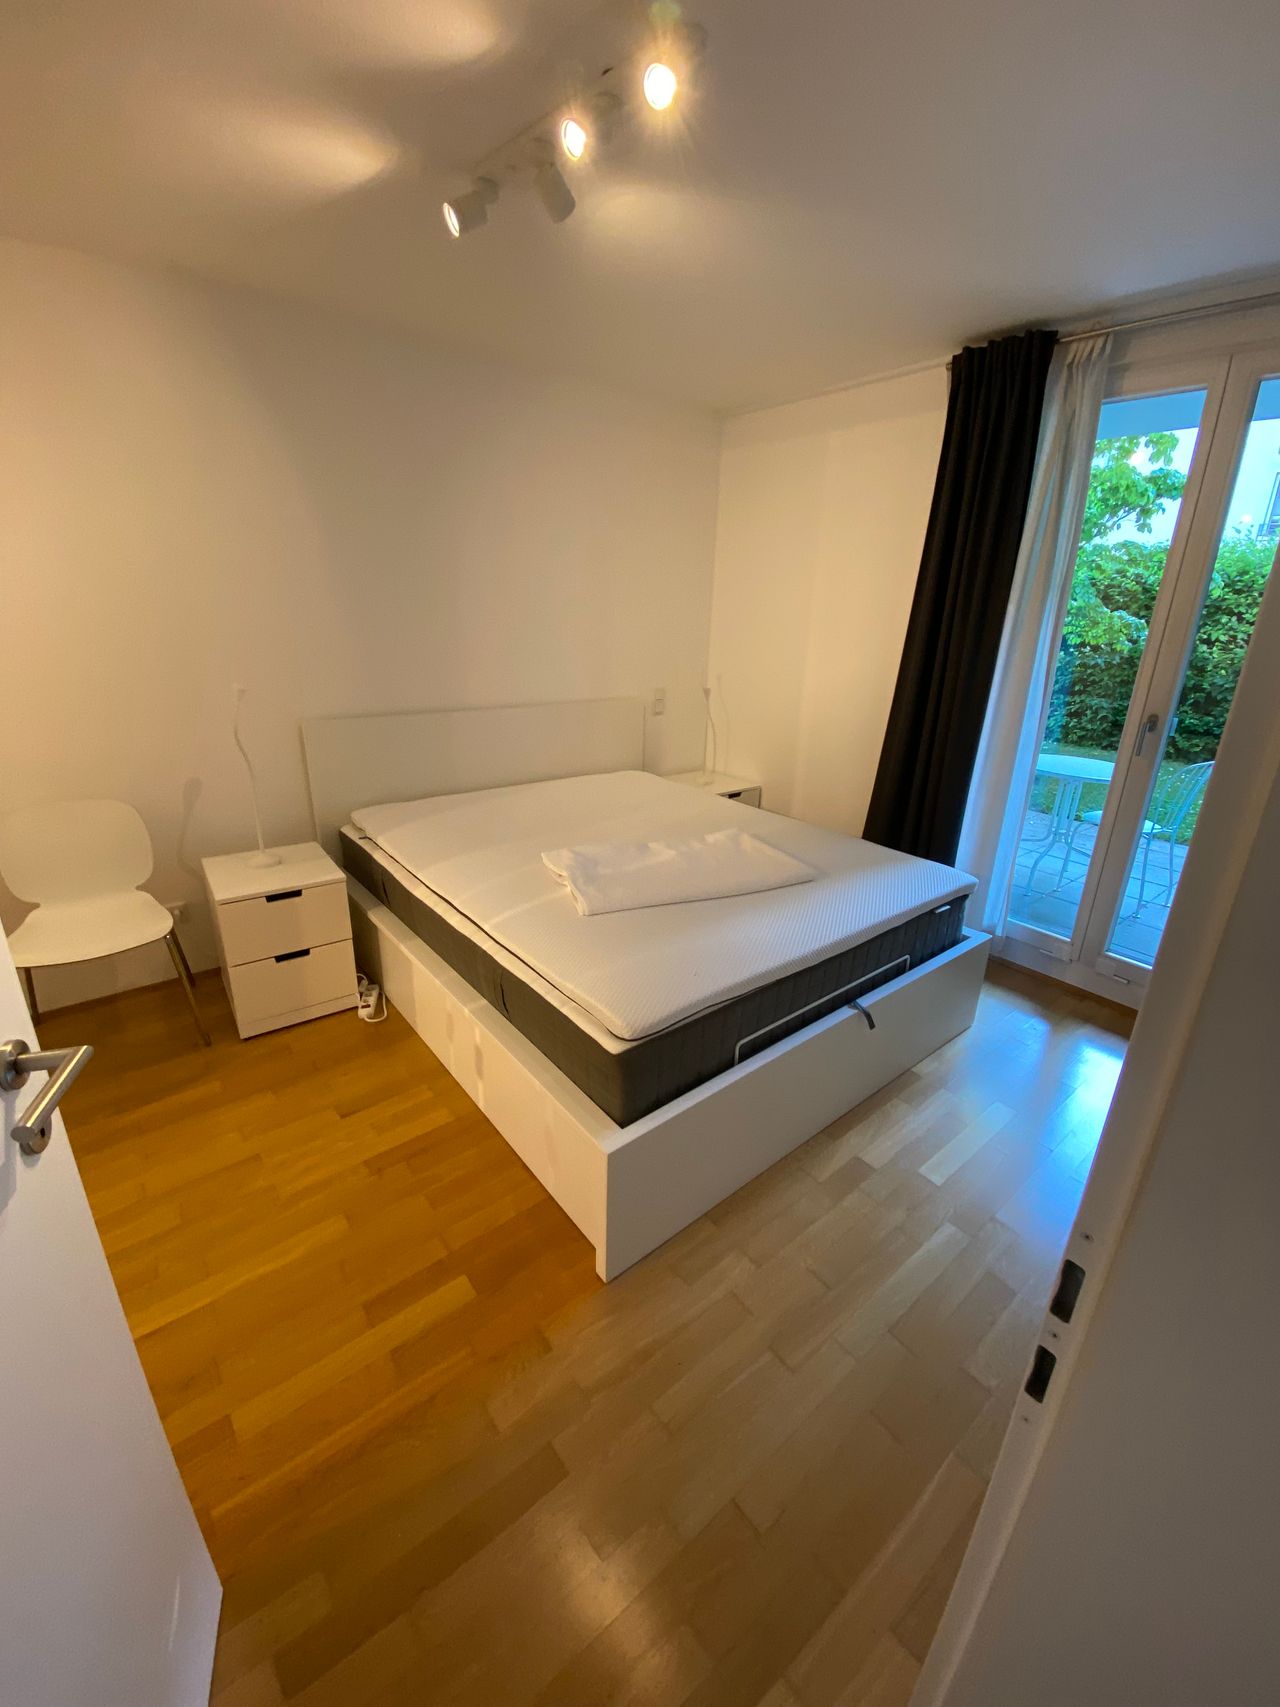 Beautiful modern terrace apartment with underground parking space in Munich.